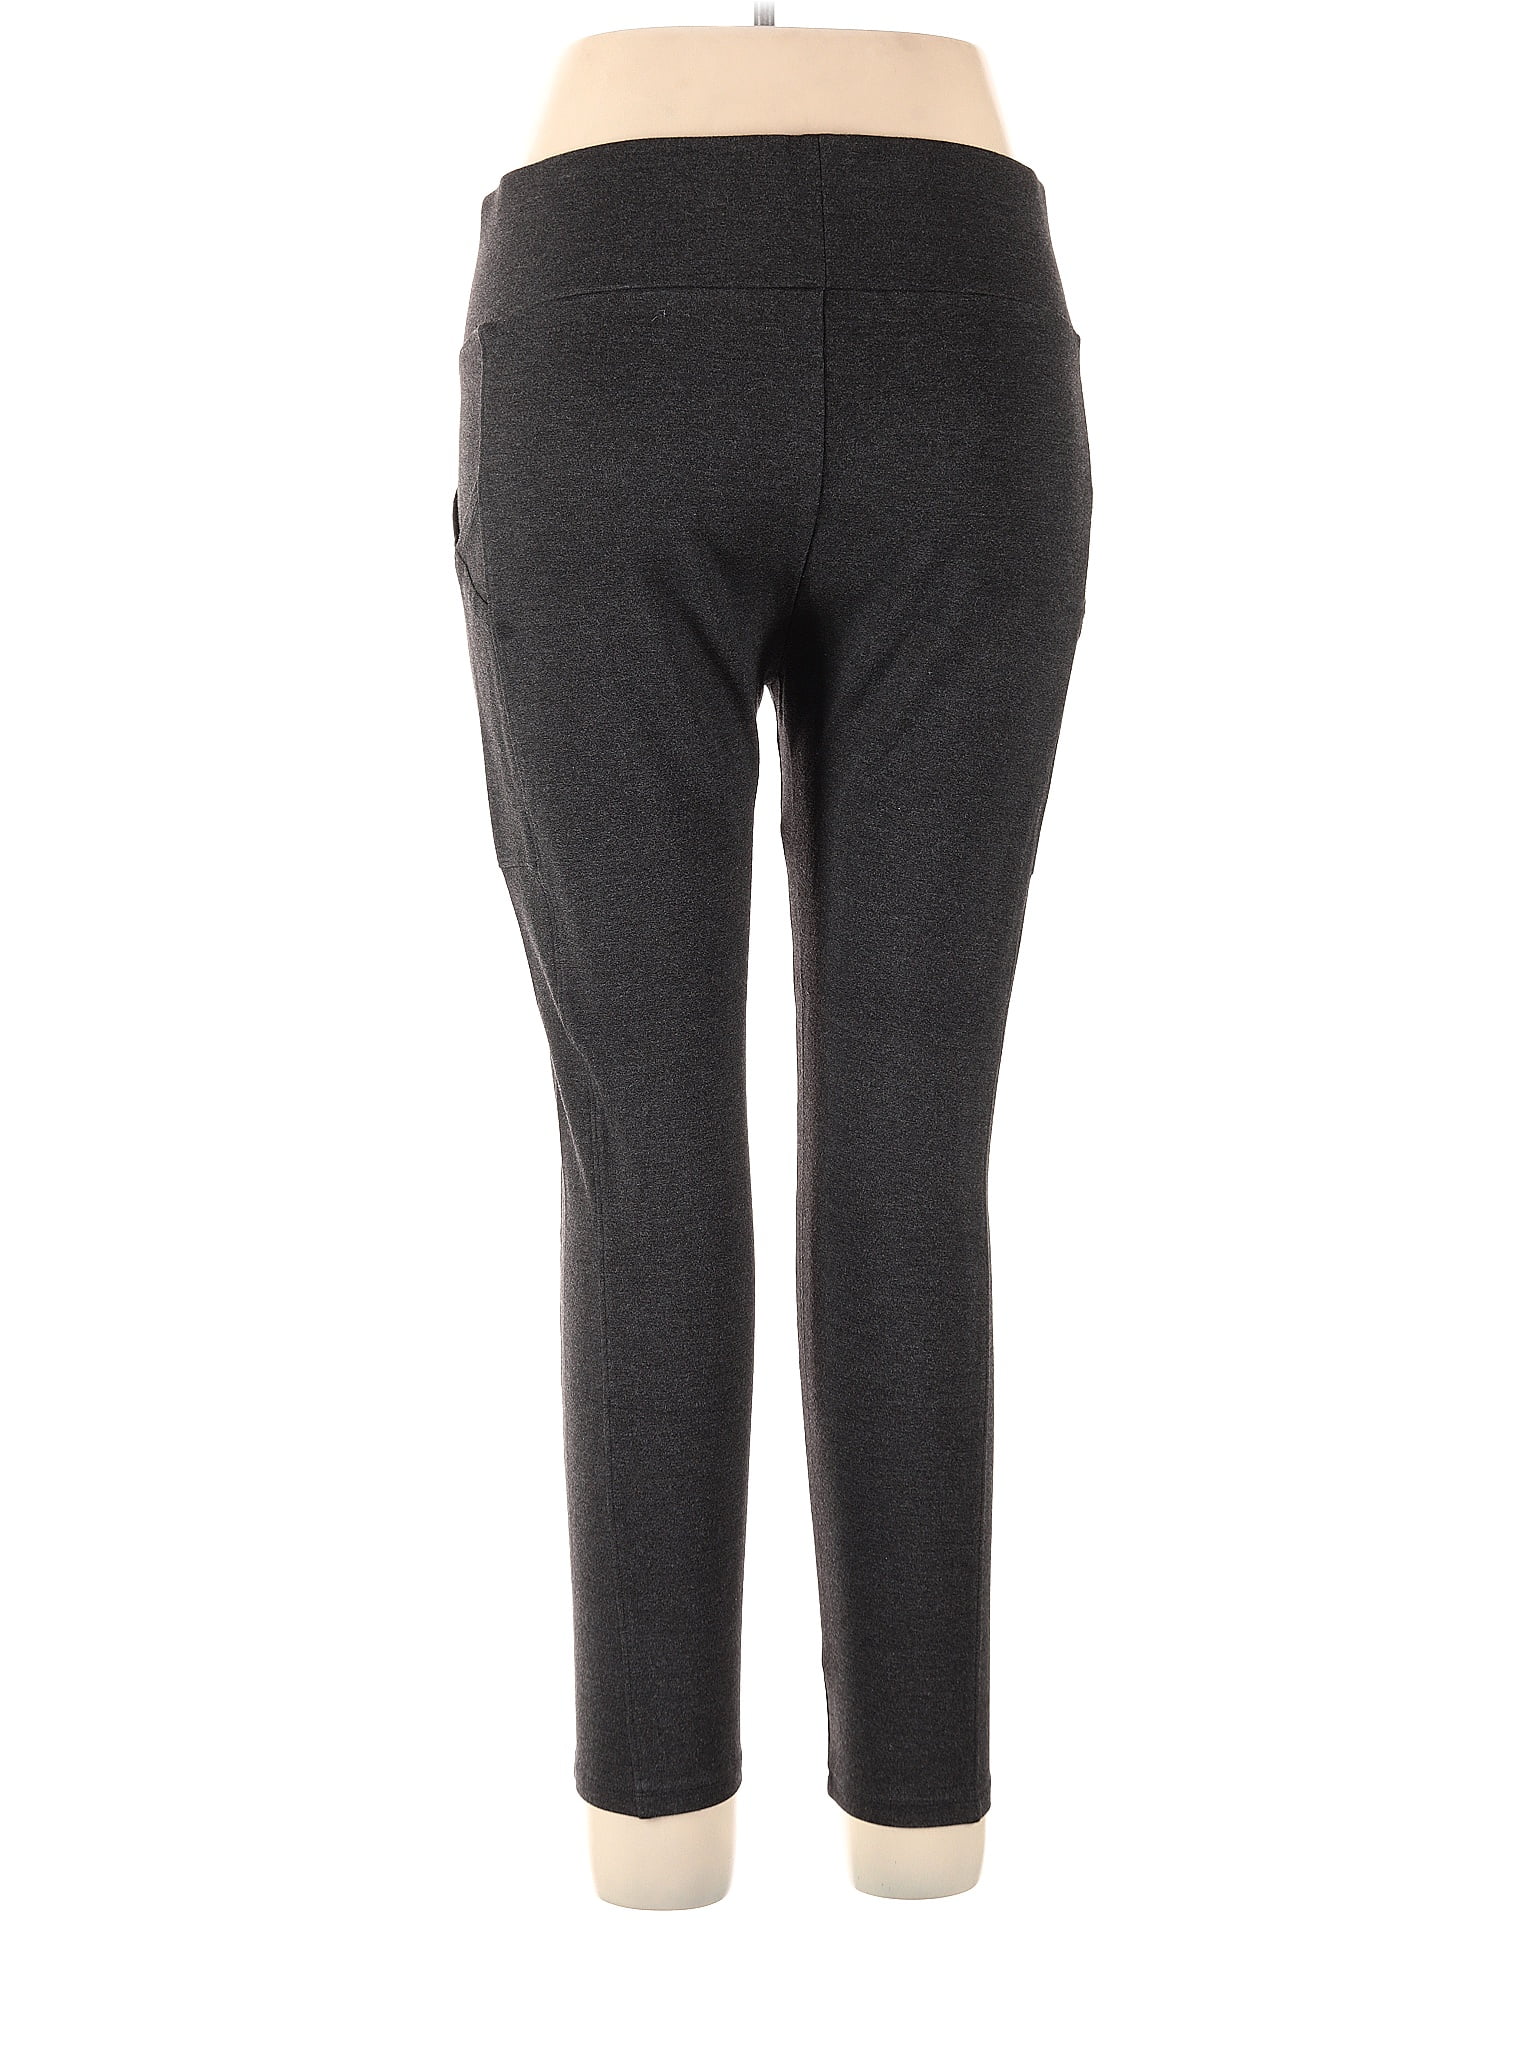 Lou & Grey for LOFT Black Gray Casual Pants Size XL - 69% off